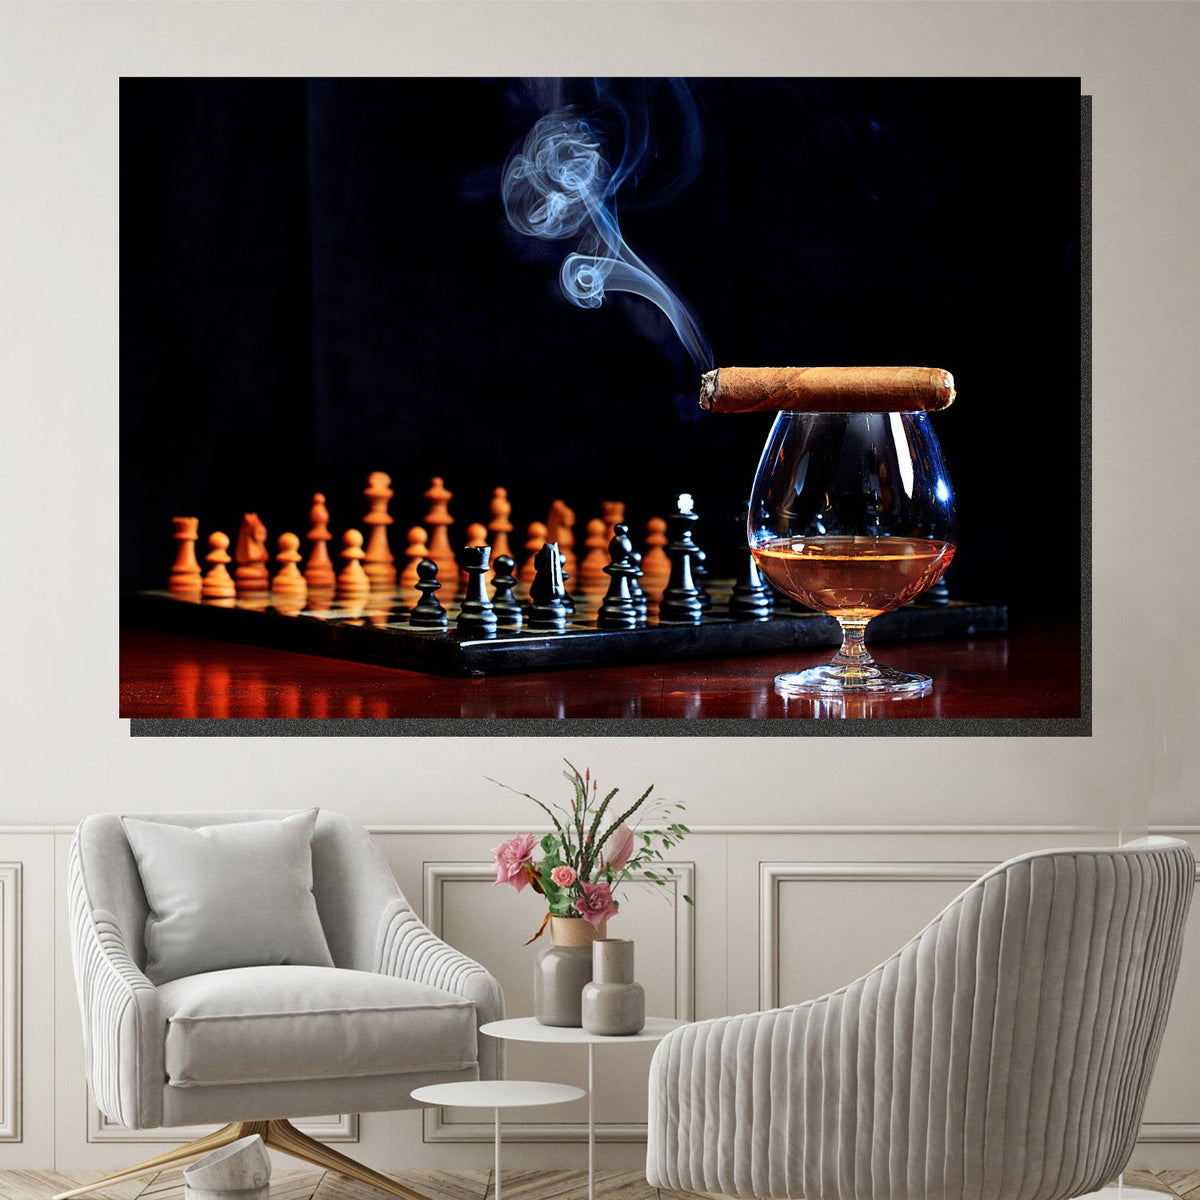 https://cdn.shopify.com/s/files/1/0387/9986/8044/products/ChessScotchandCigarCanvasArtprintStretched-4.jpg